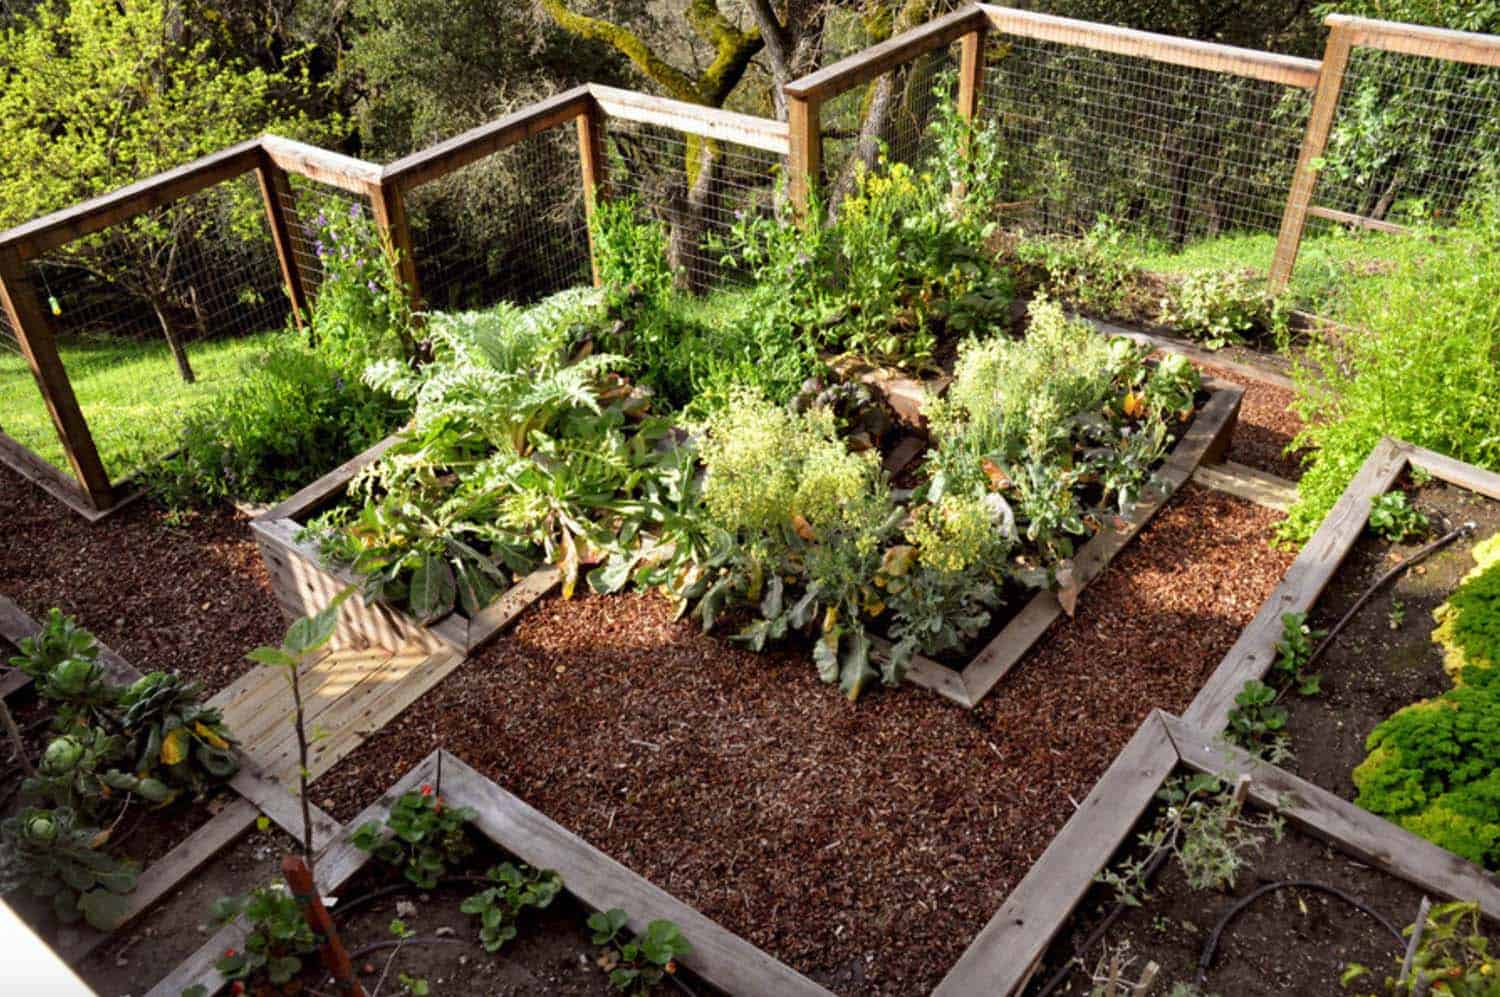 A sloped garden with vegetable patches